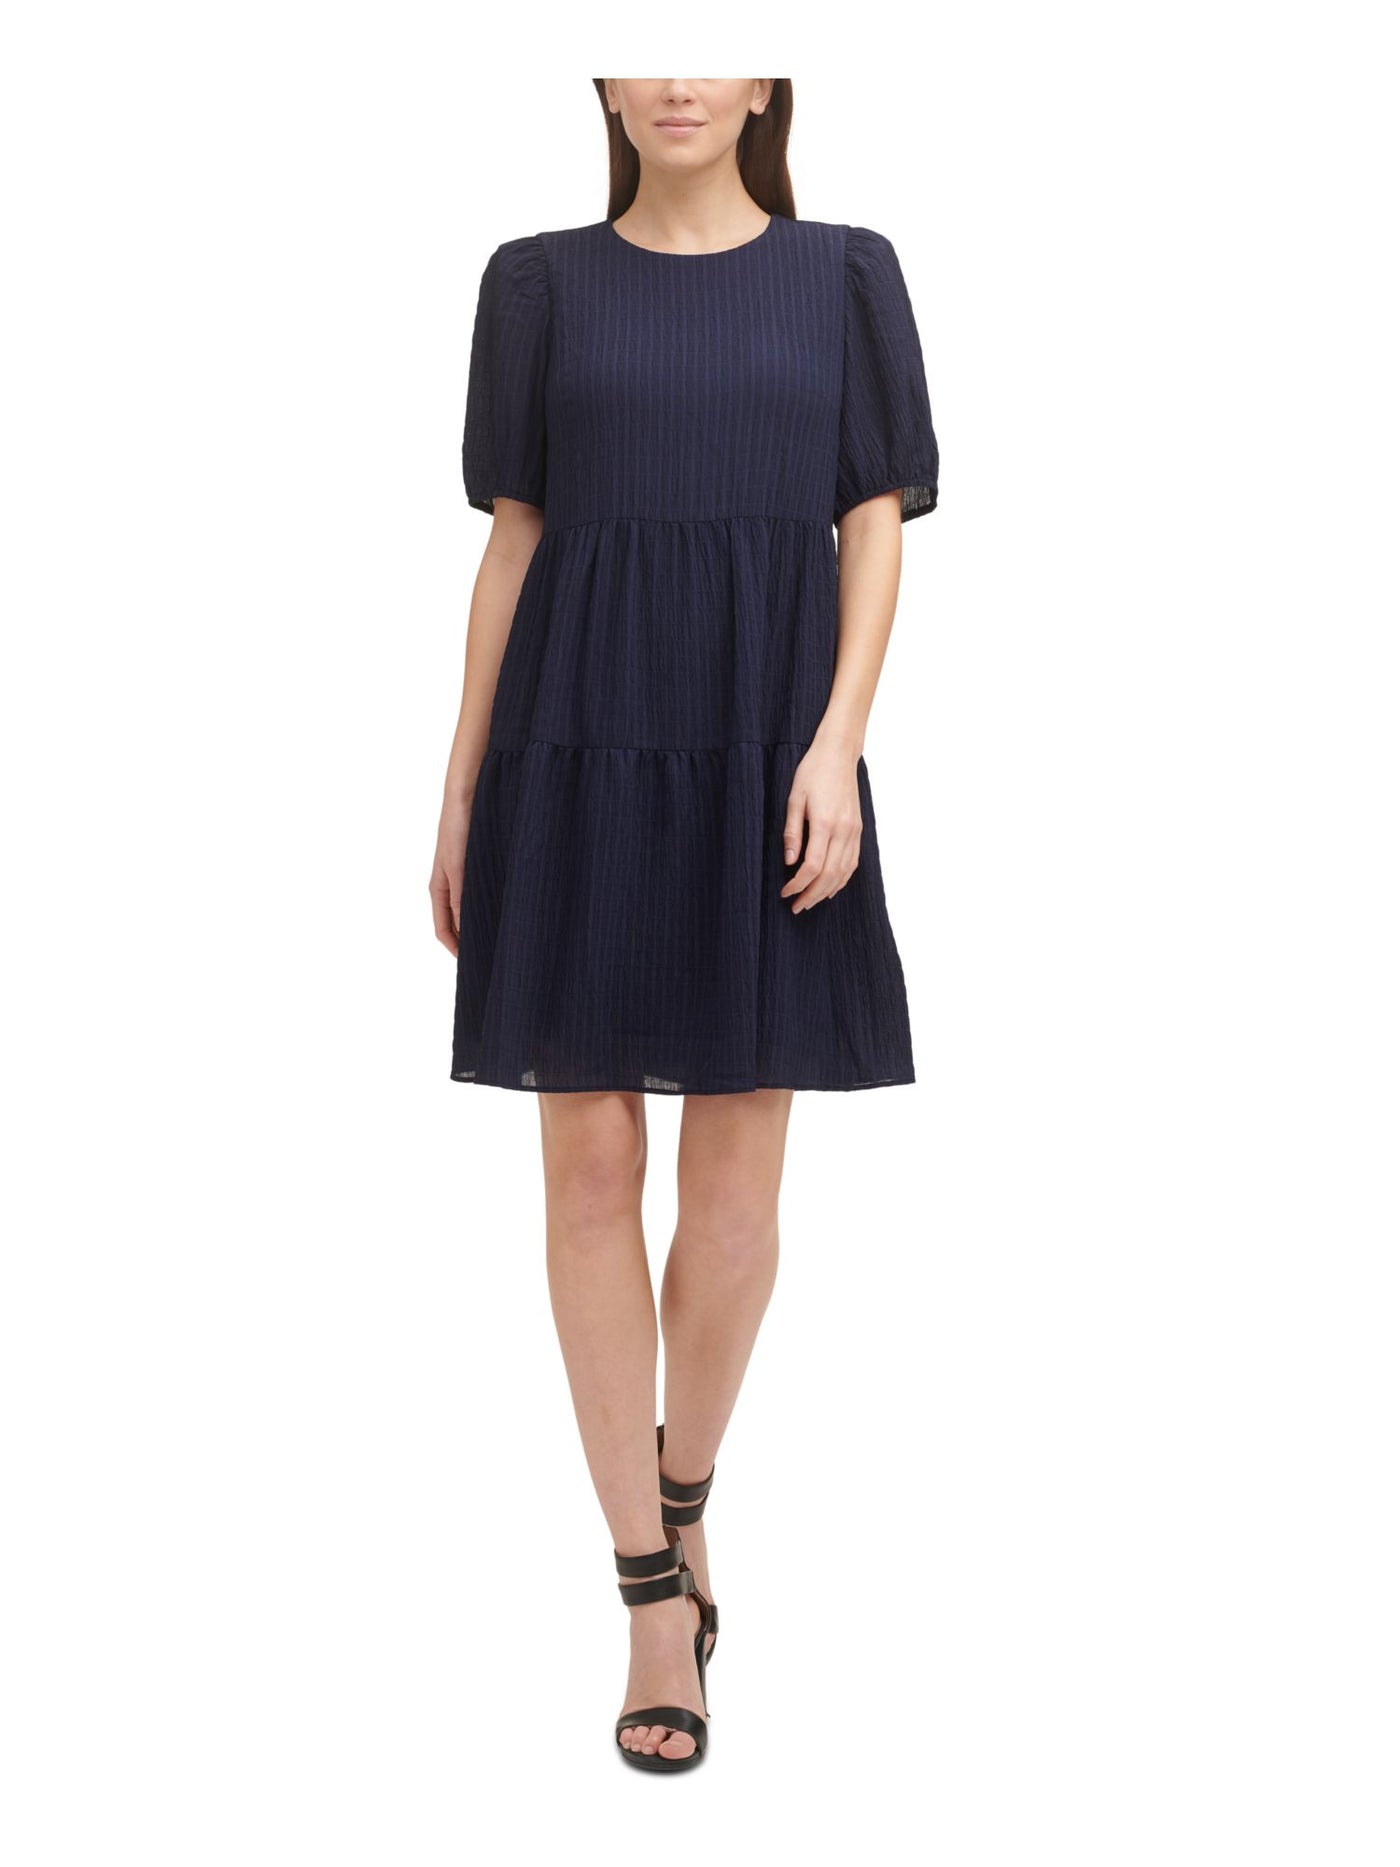 DKNY Womens Stretch Textured Sheer Tiered Lined Keyhole Elbow Sleeve Crew Neck Above The Knee Party Shift Dress